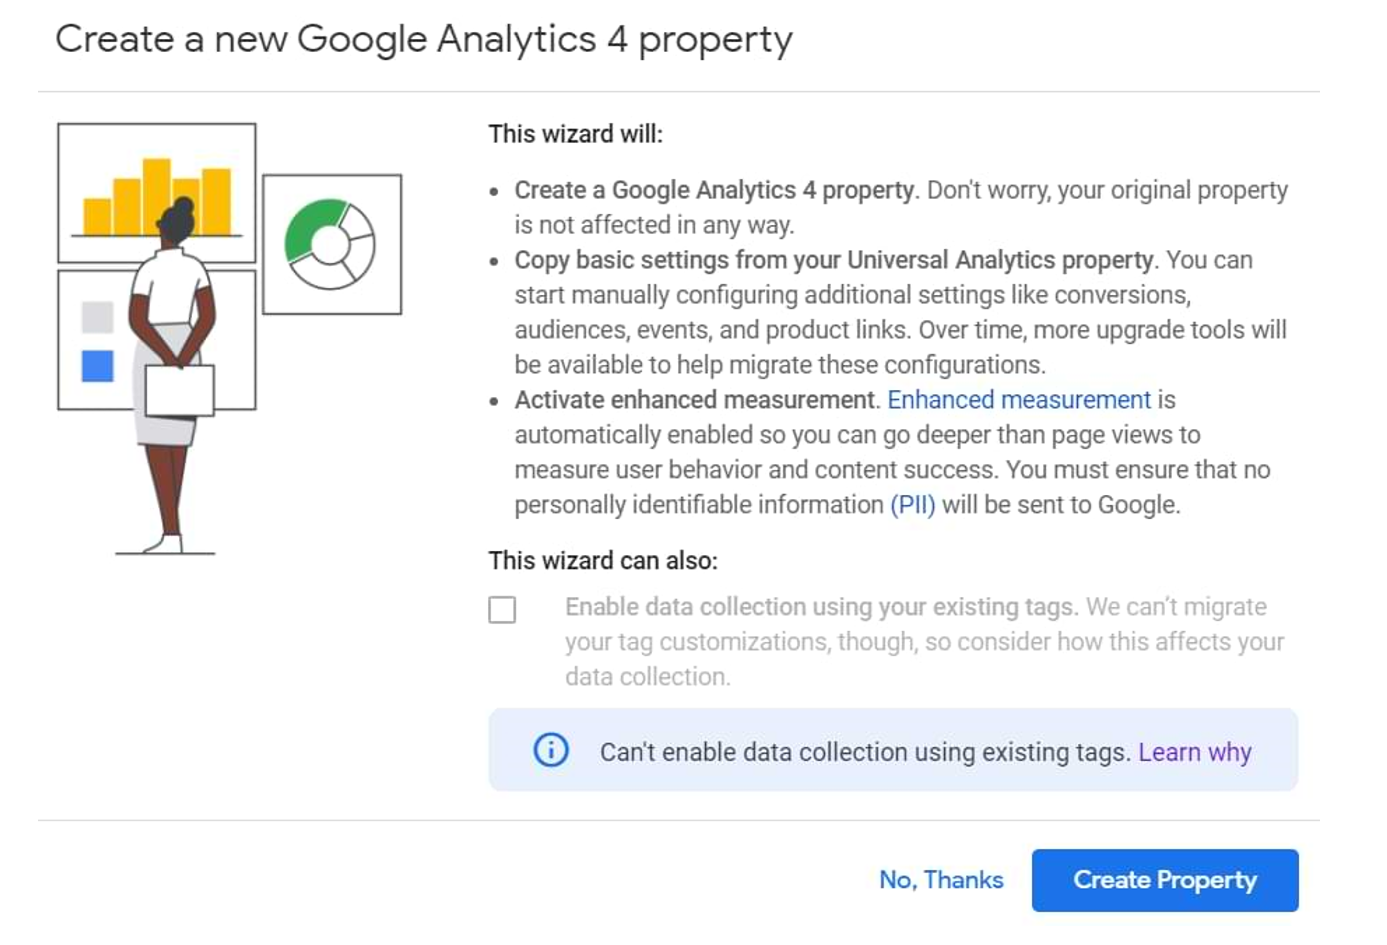 13. What happens when you create a new Google Analytics 4 property